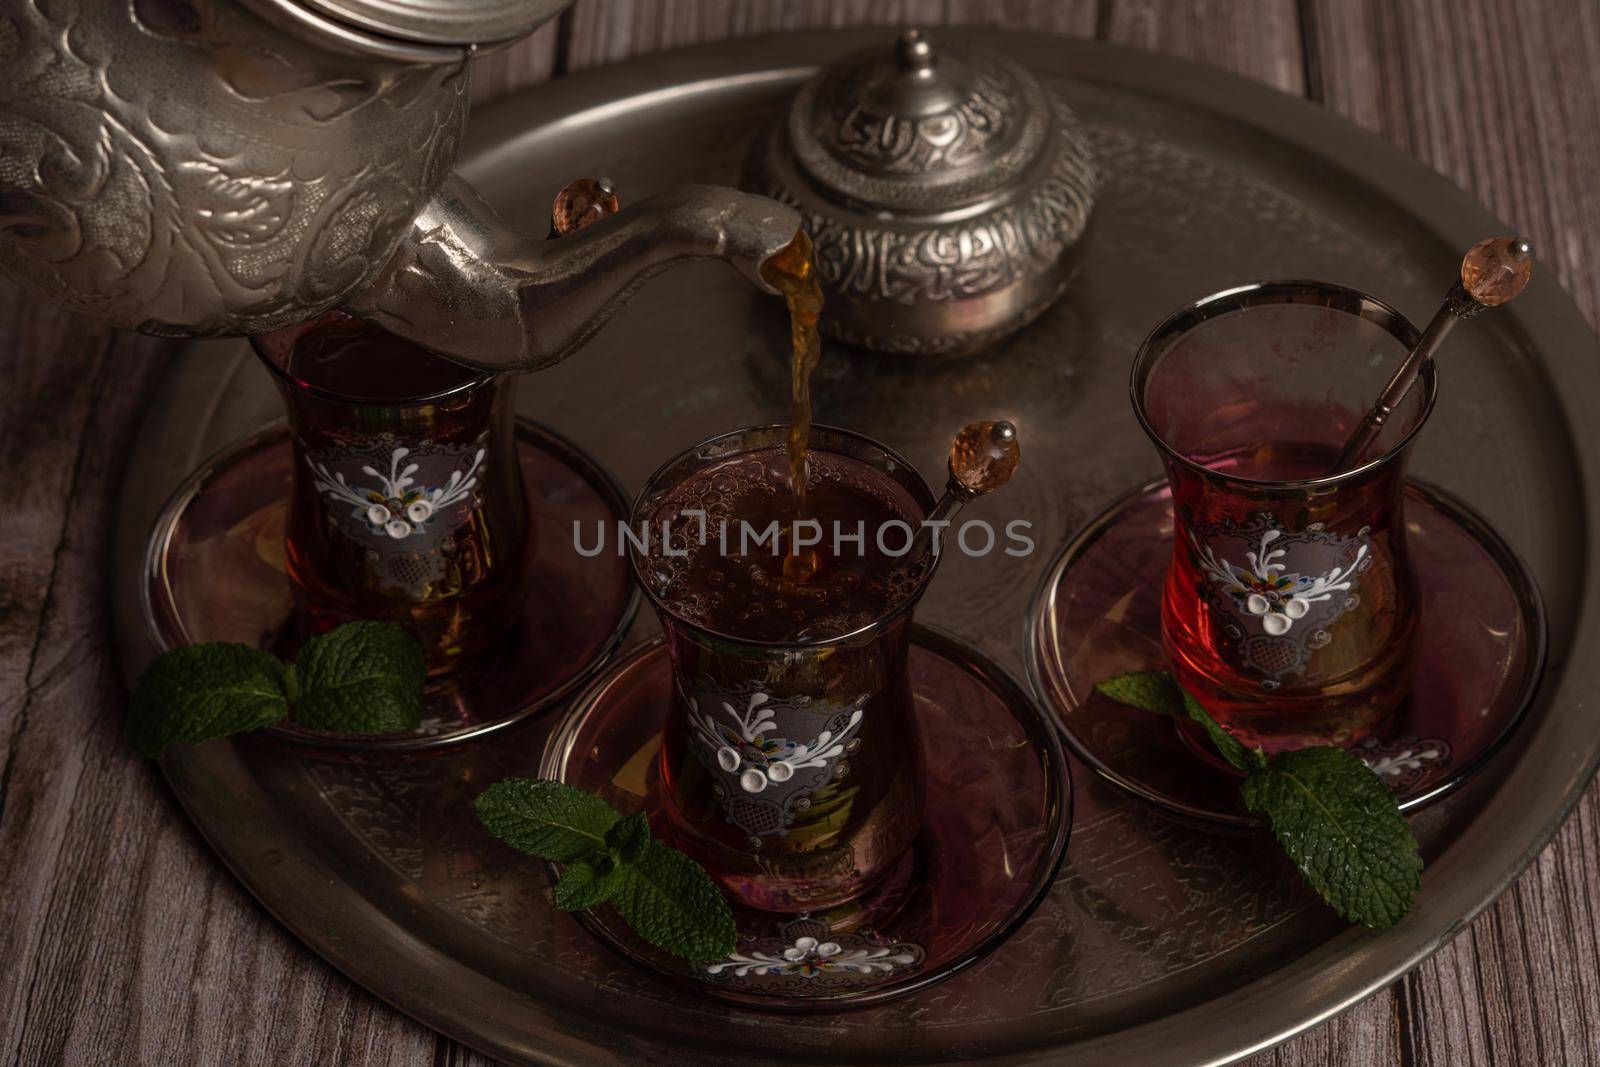 serving hot Moorish tea on a tray with glasses and pitcher on a wooden table